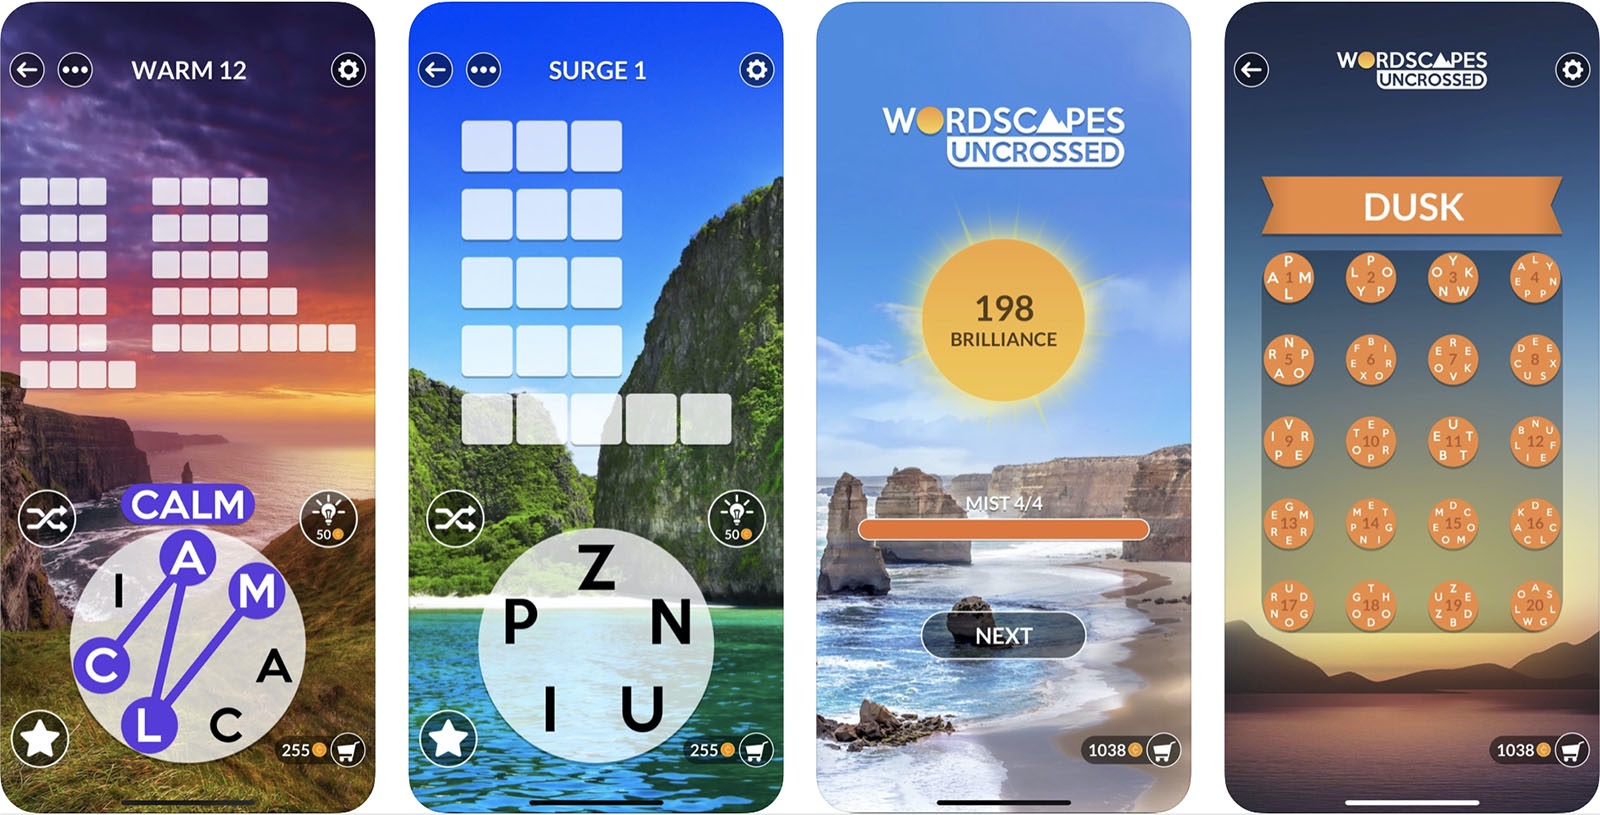 Screenshot of Wordscapes Uncrossed